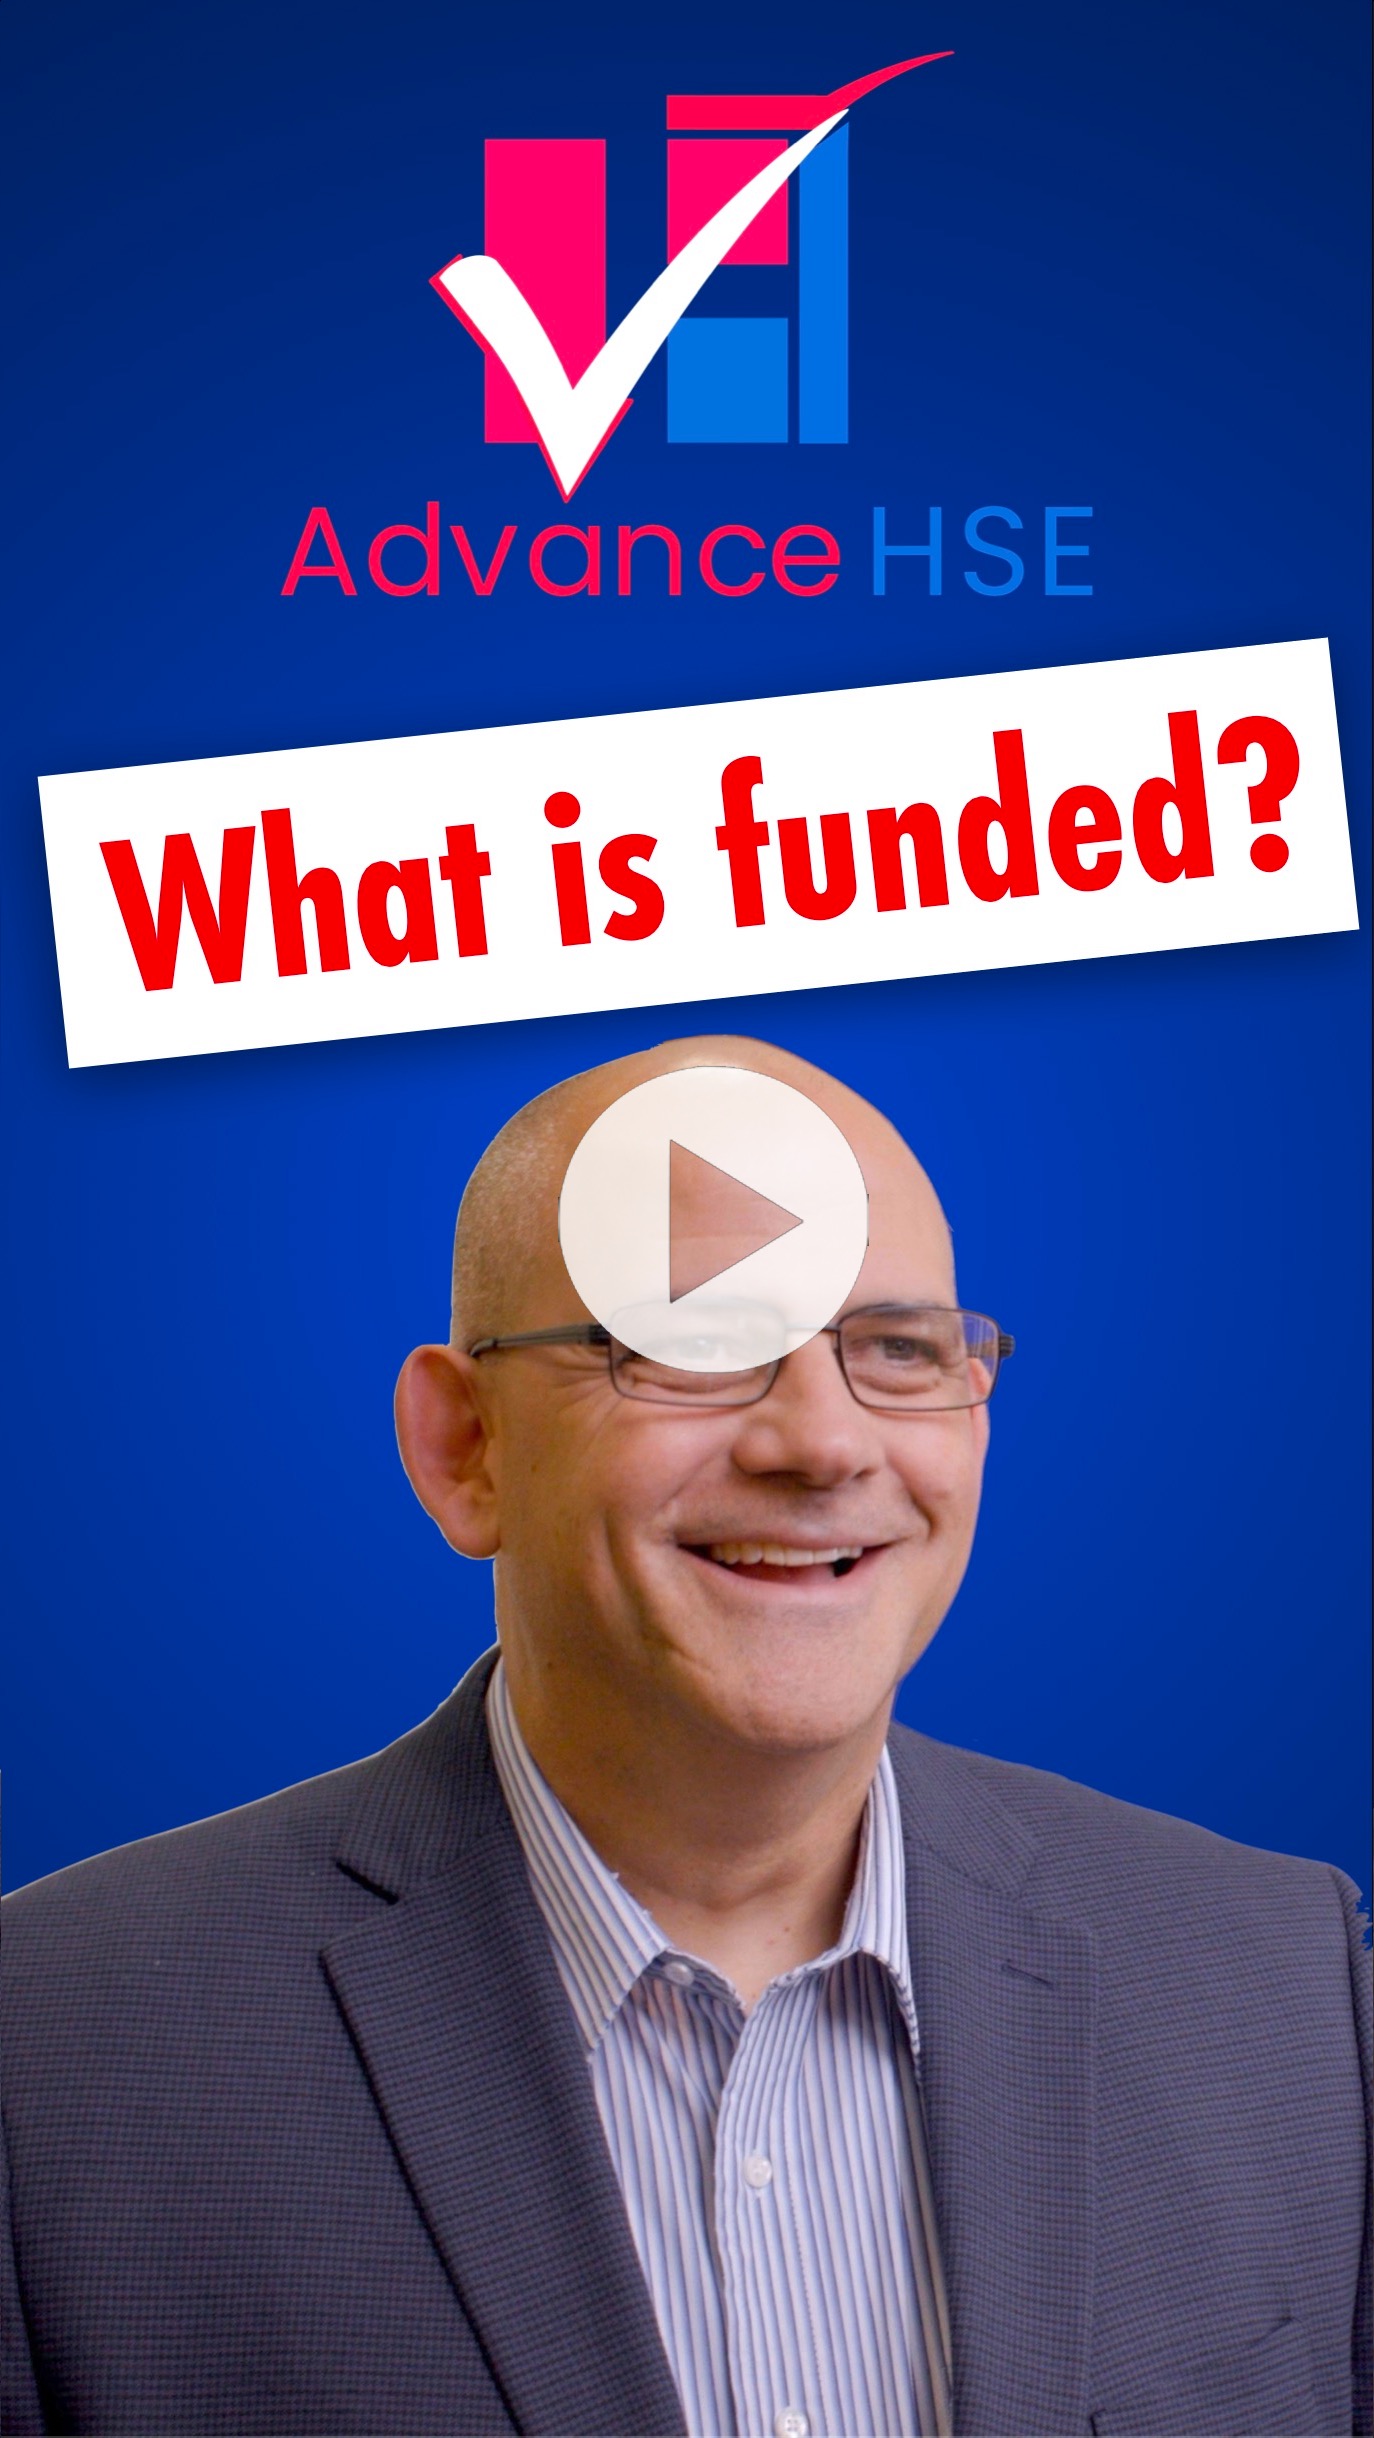 What is funded?